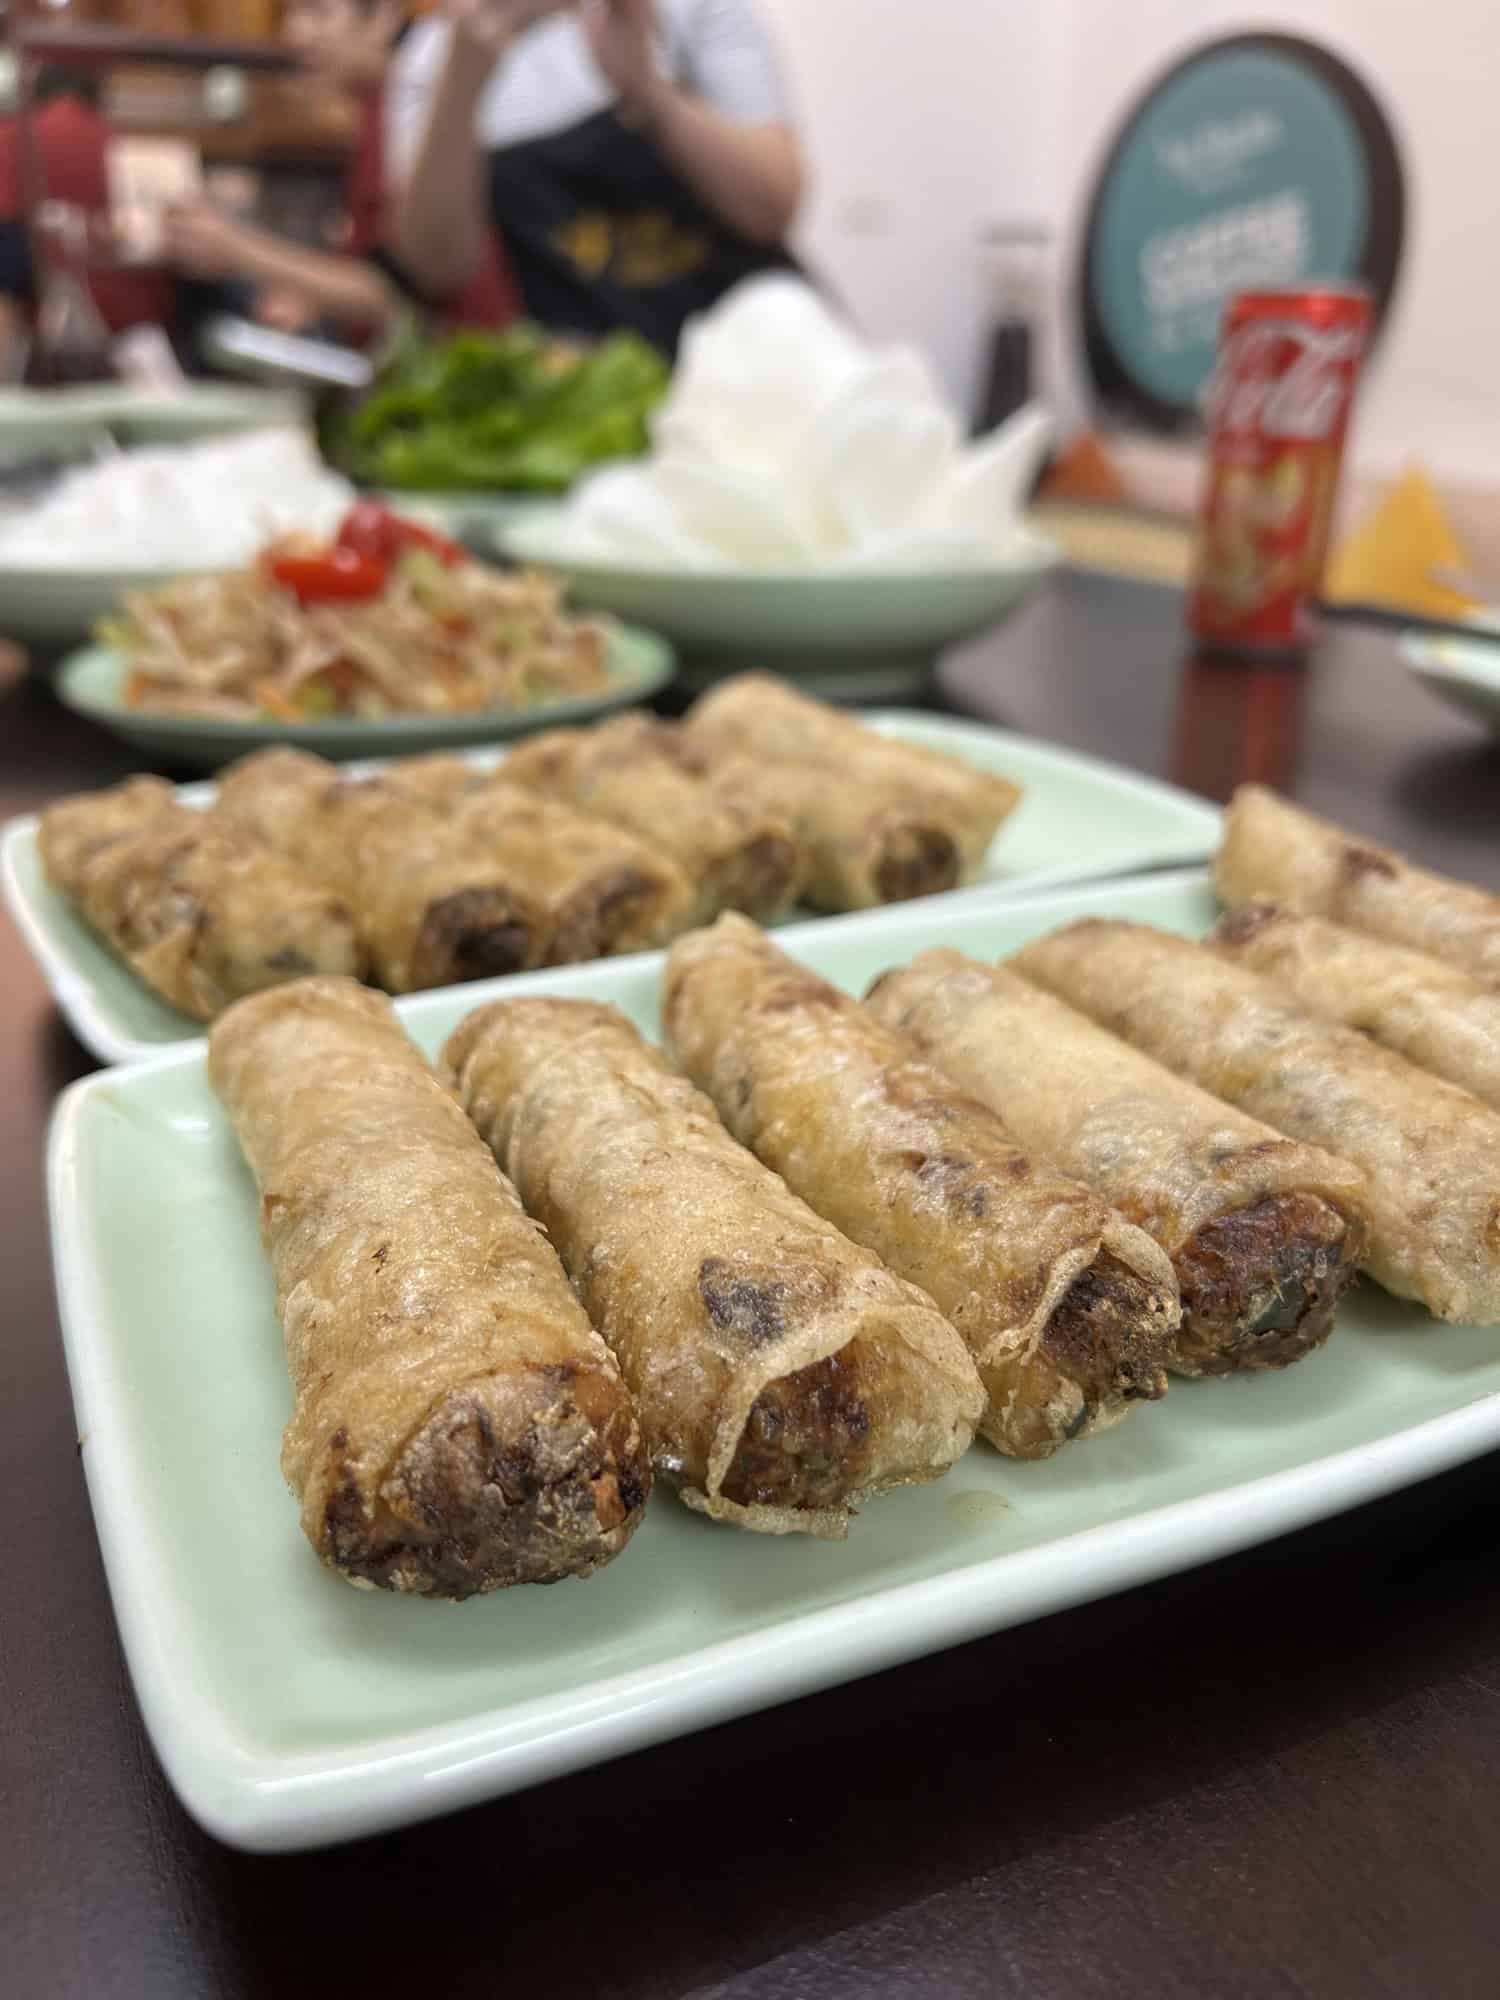 Vietnamese fried Spring Rolls made during a cooking class in Hoi An